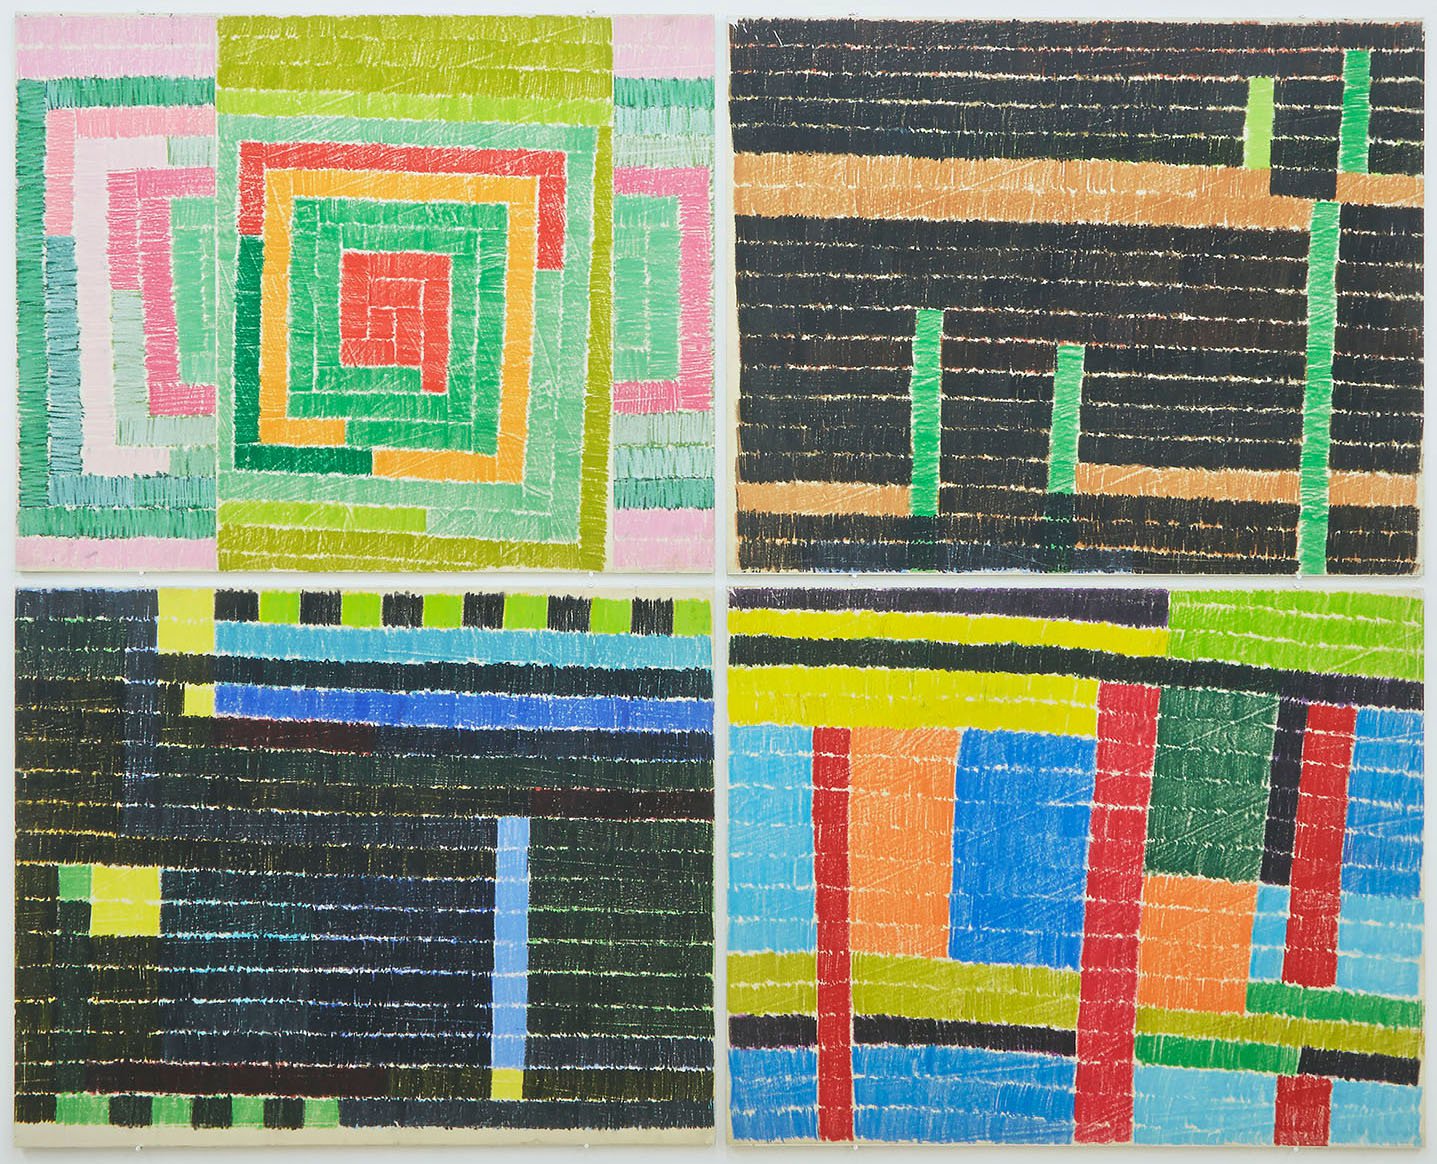 Lukas Duwenhögger, (L-R) Aztec; Gardens by Night; Oil Pits by Night; The Railway Bridge, oil pastels on paper mounted on wood, 89 x 112 cm each, 1977